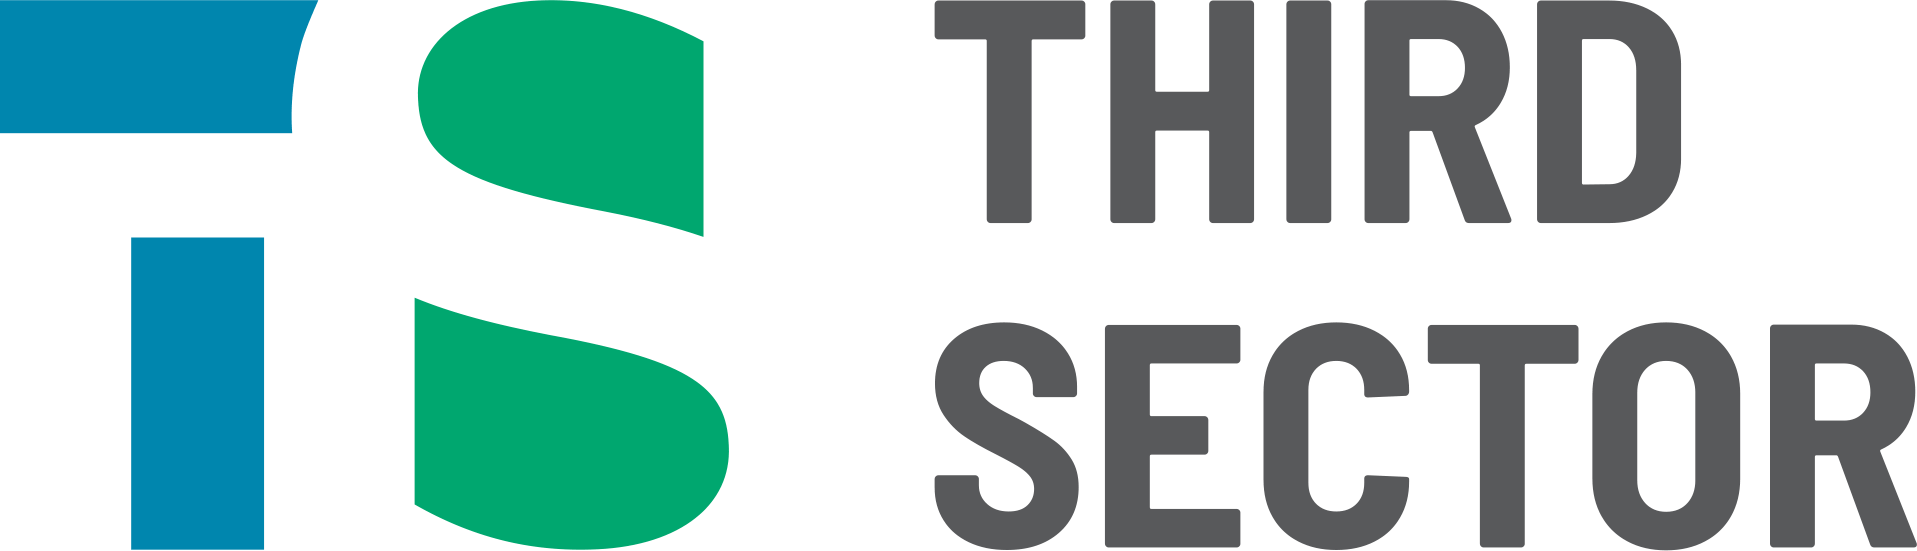 third sector | third sector capital partners (powered by donorbox)